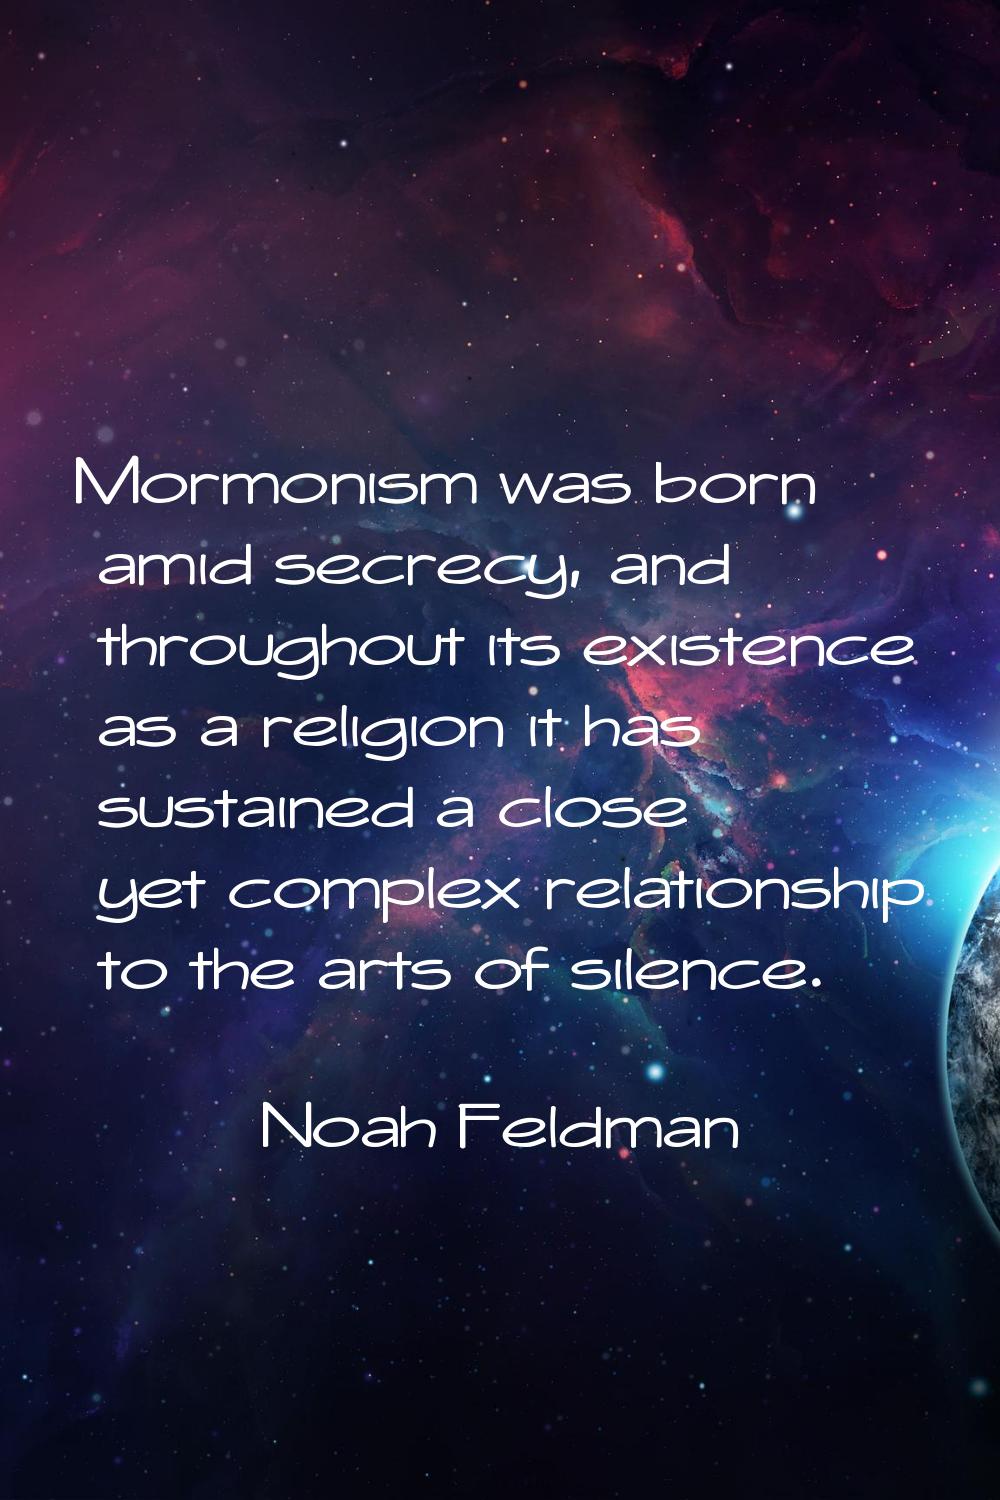 Mormonism was born amid secrecy, and throughout its existence as a religion it has sustained a clos